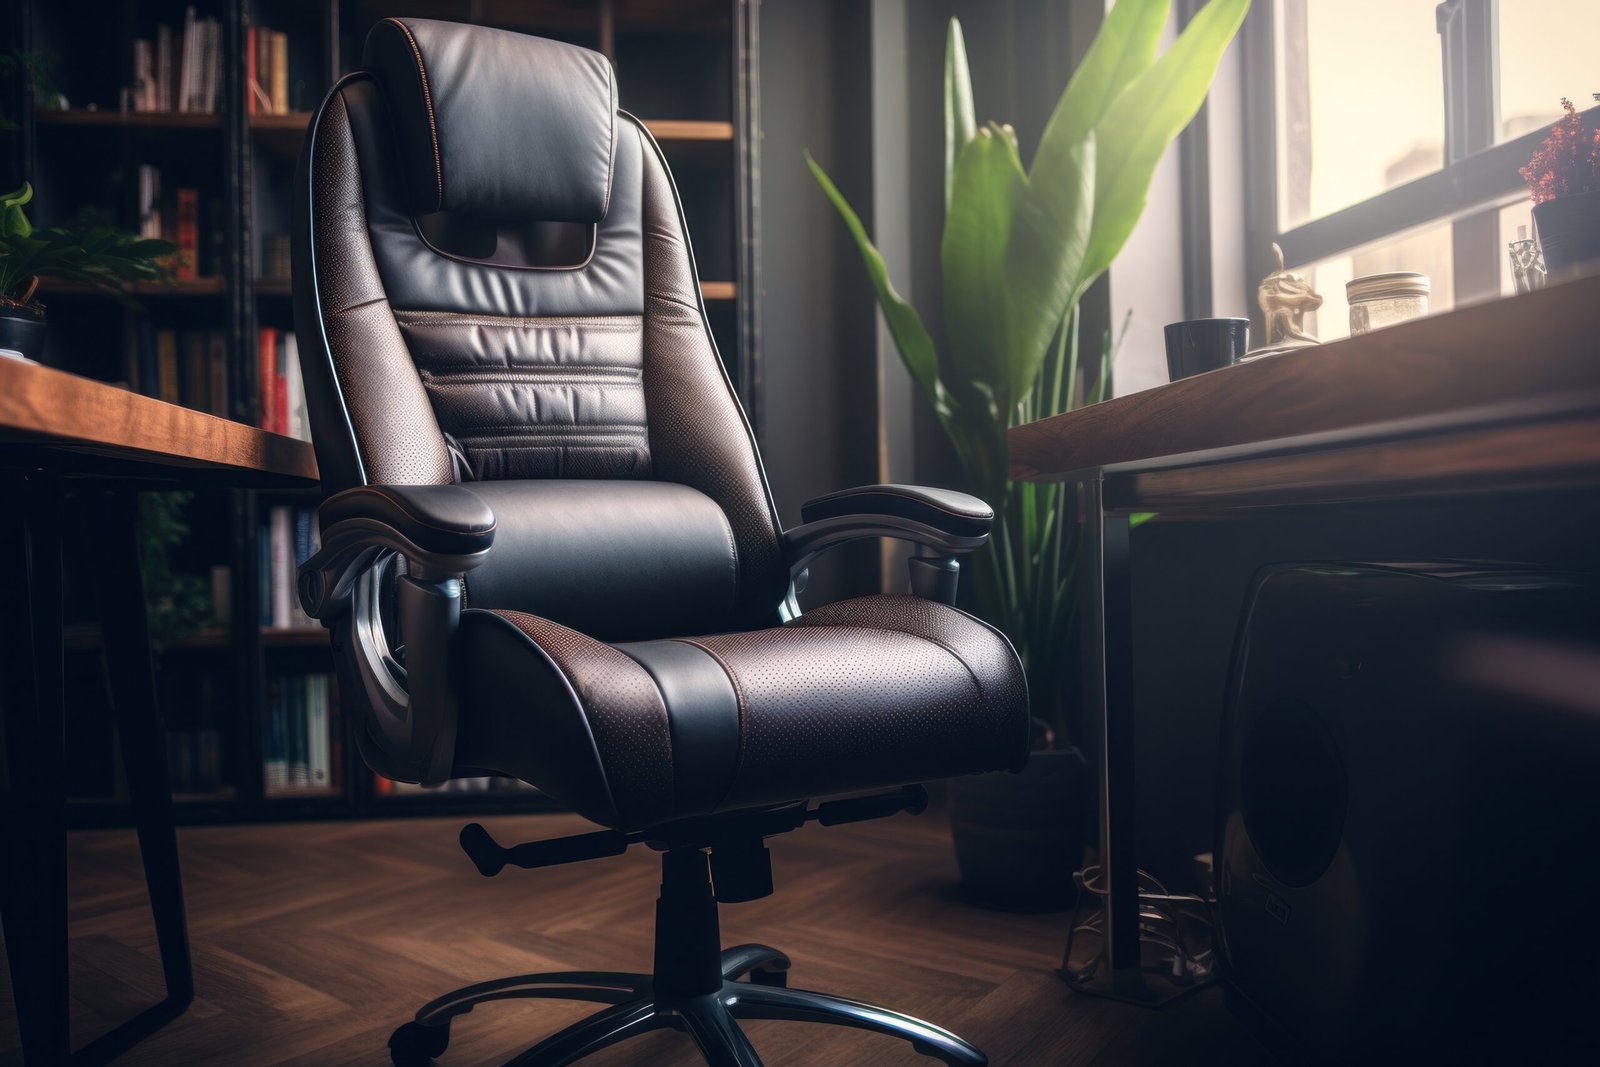 Heavy Duty Office Chairs: A Comprehensive Buyer’s Guide